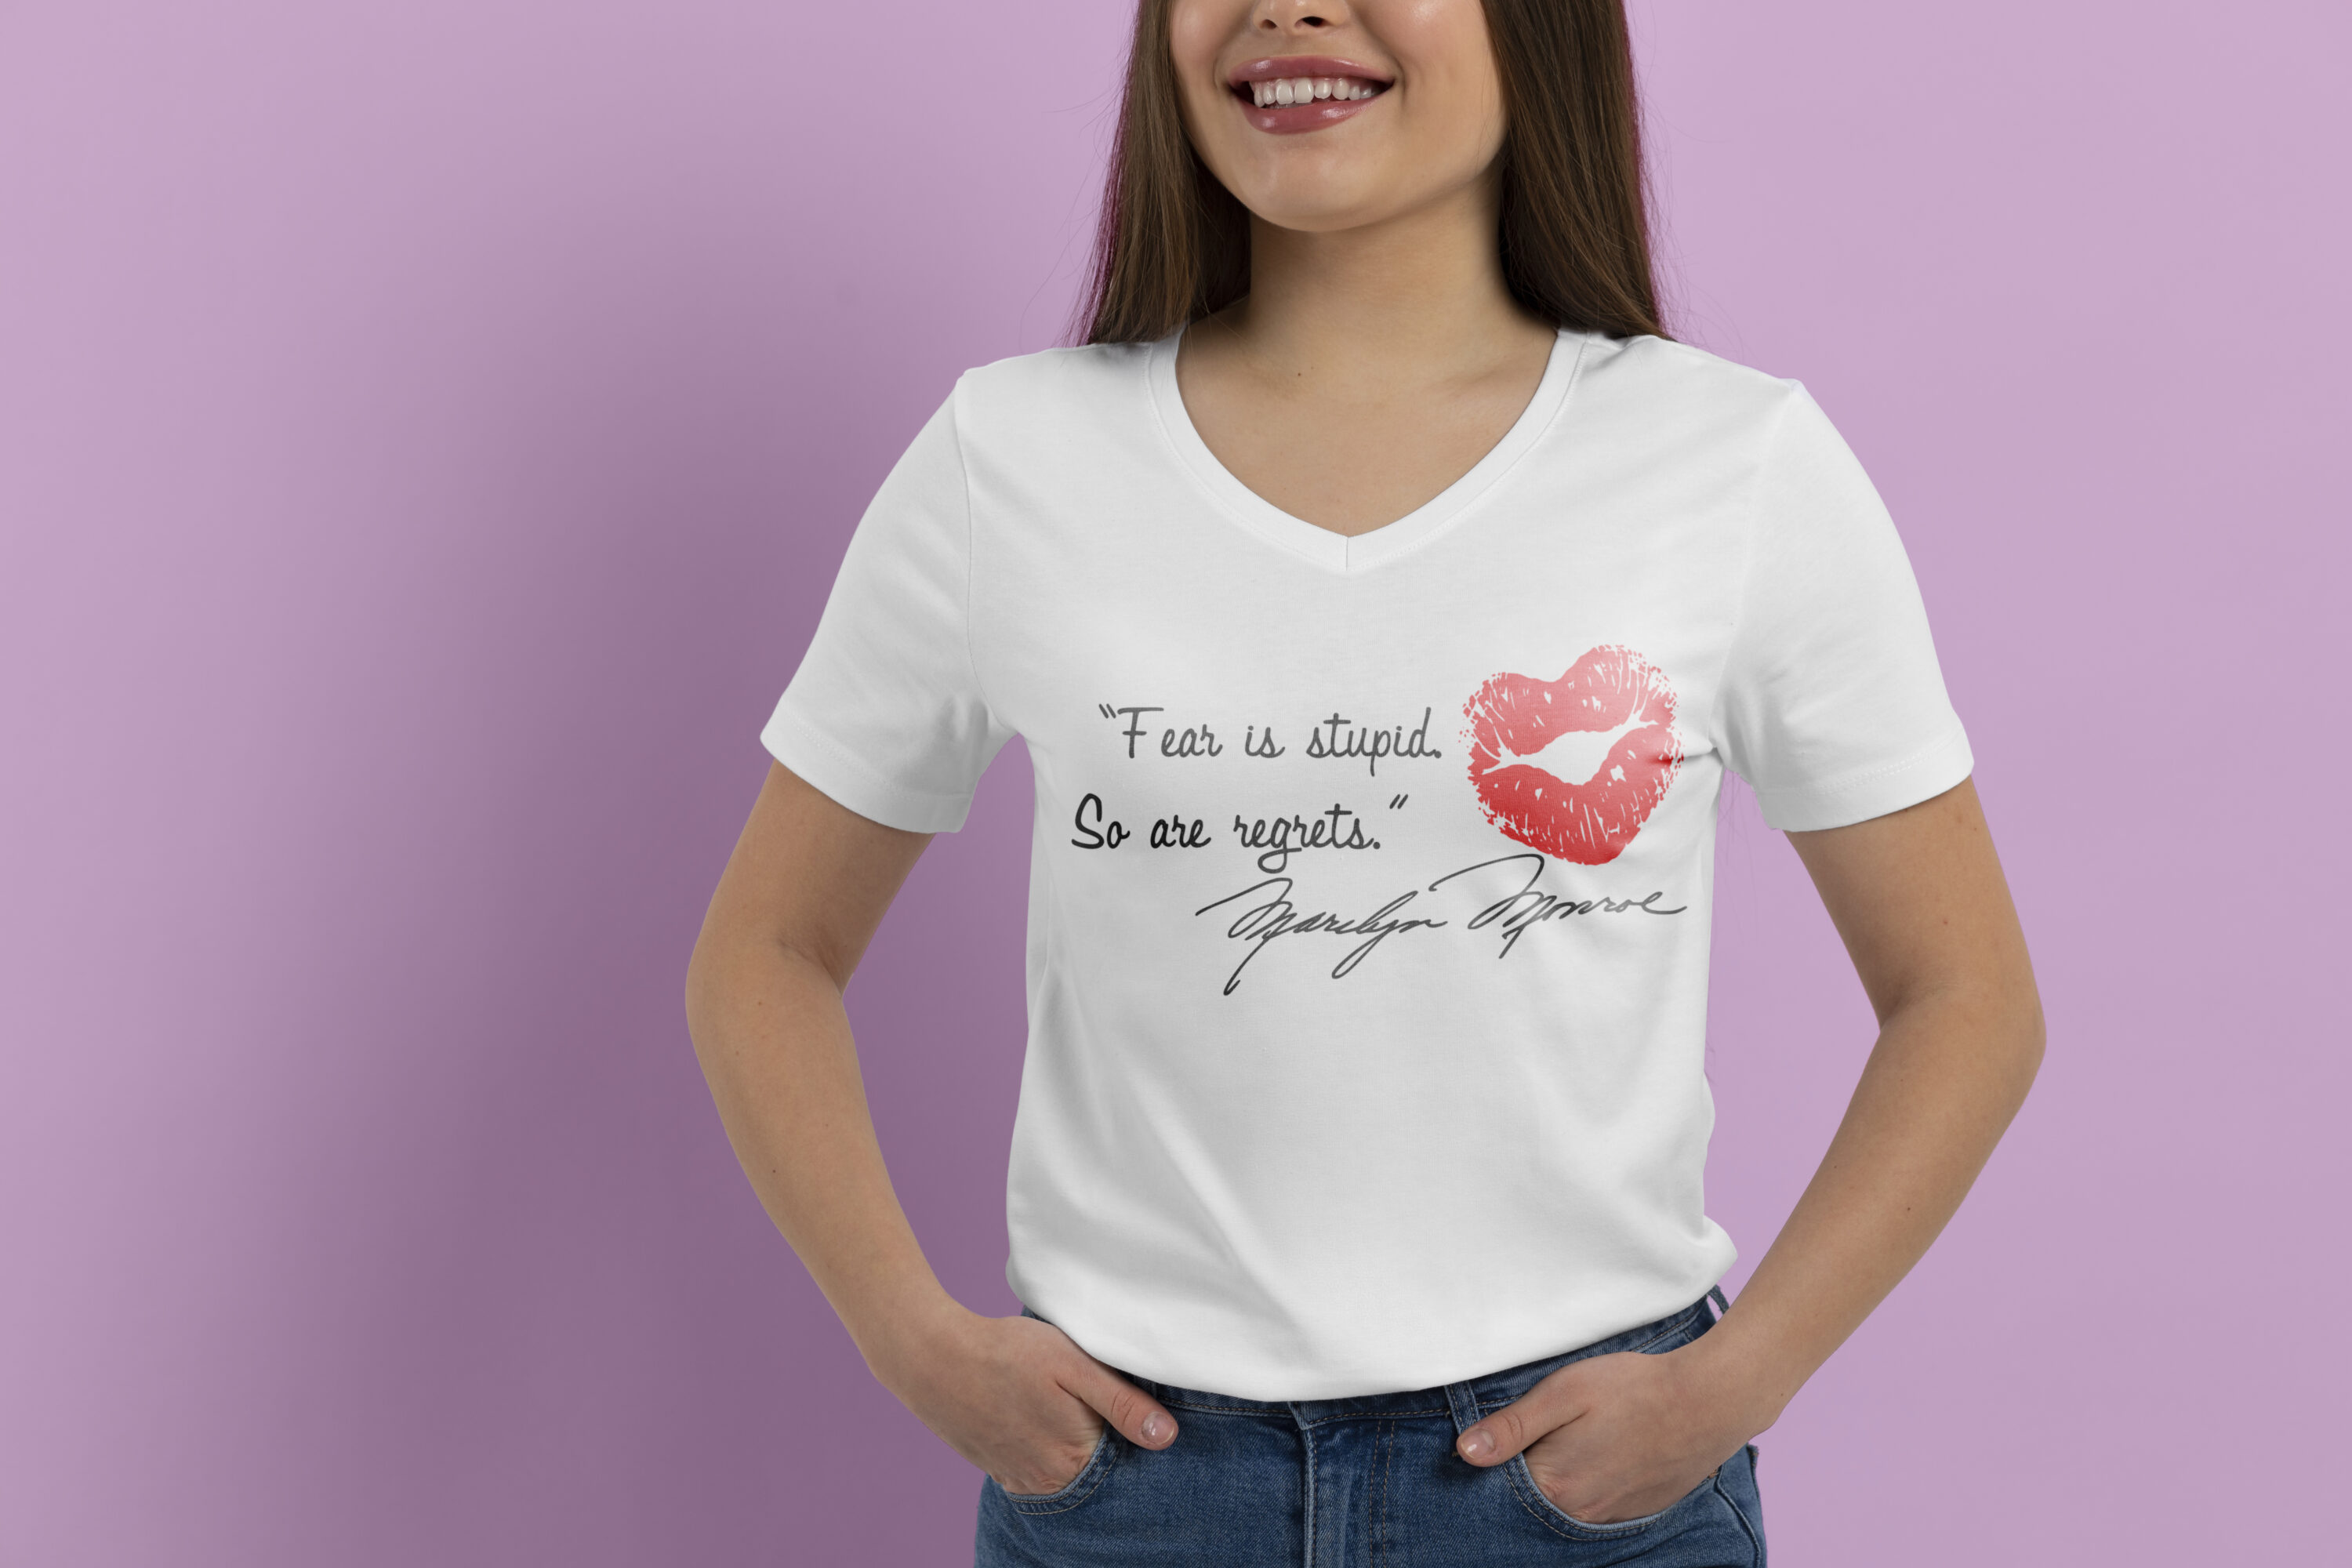 White T-shirt images with amazing Marilyn Monroe quote print.